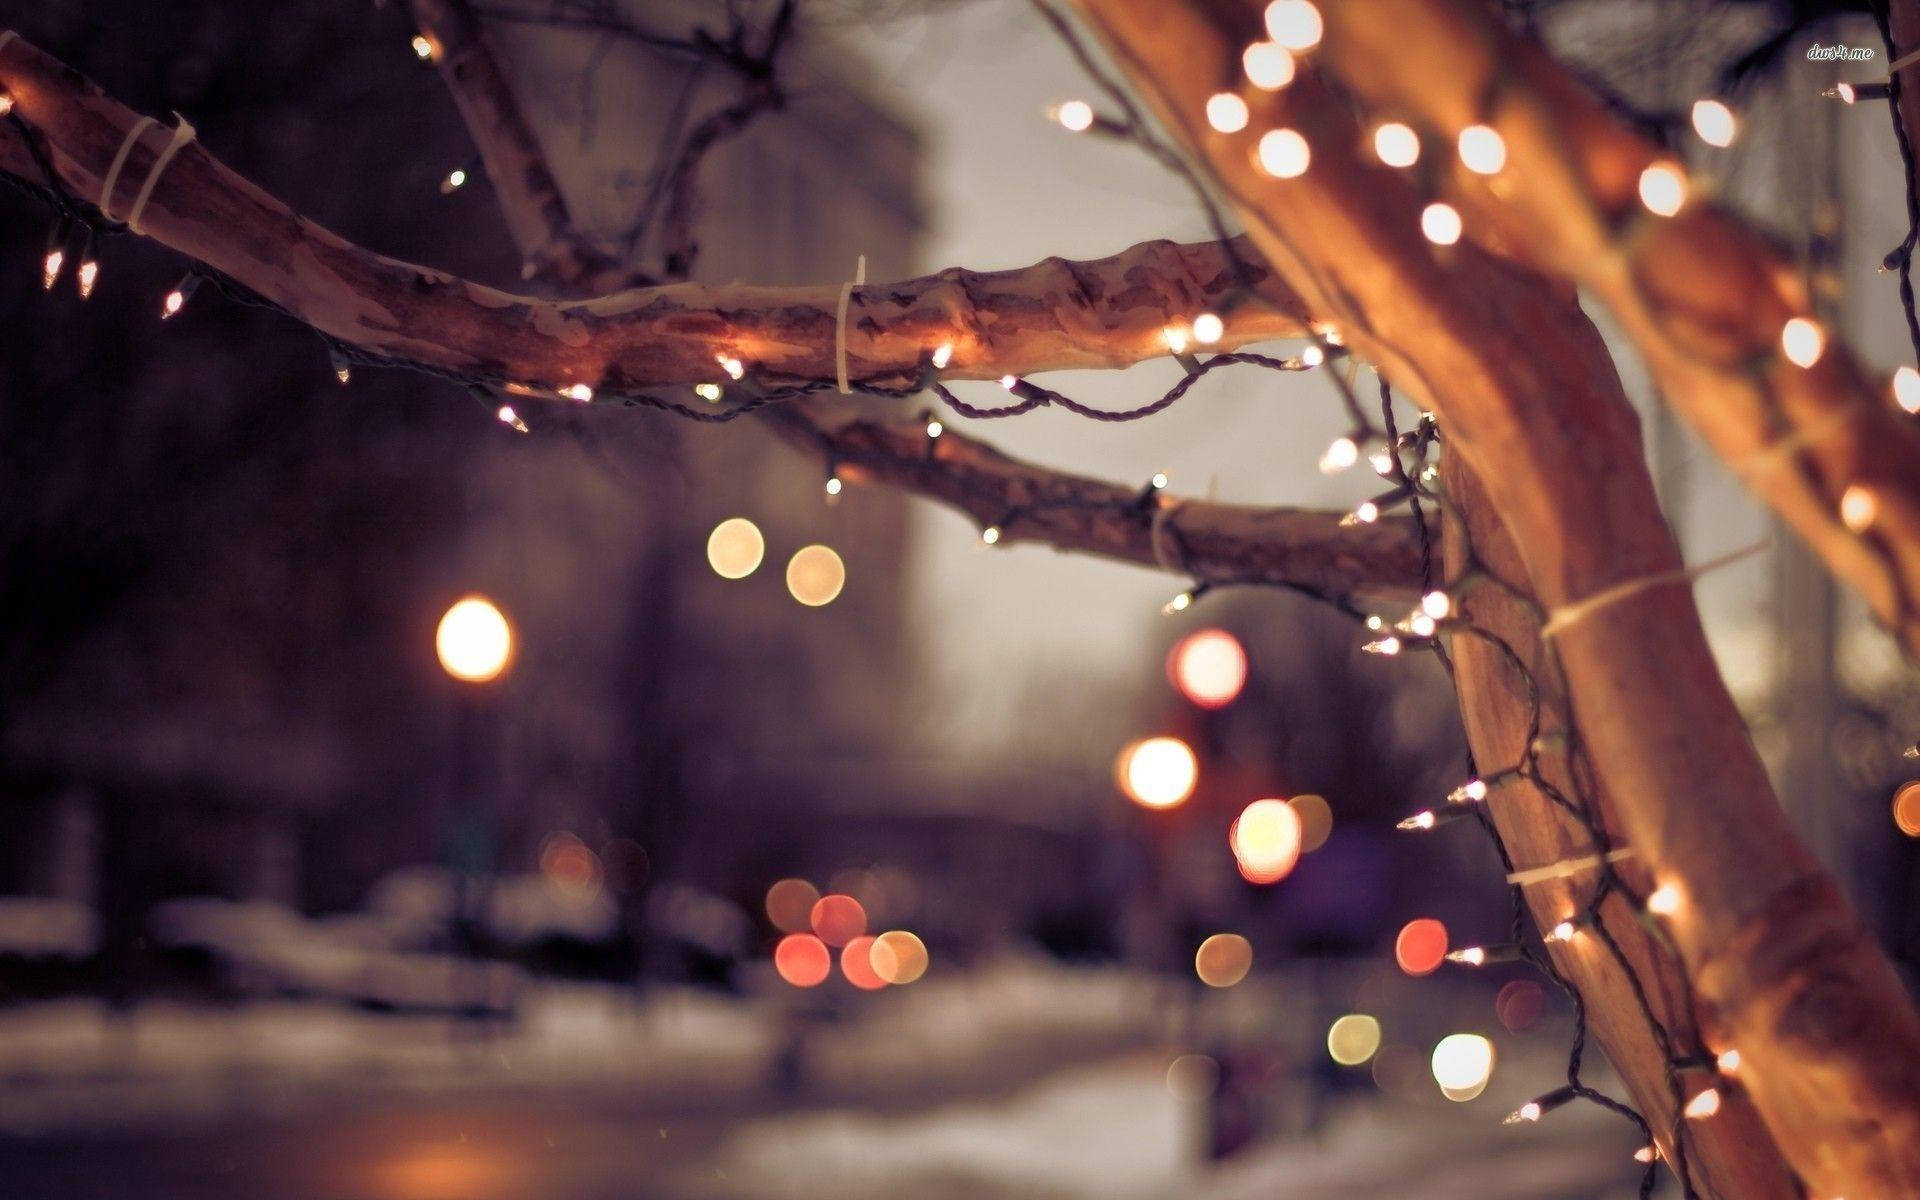 Enjoy the warm atmosphere of the holidays with holiday lights! Wallpaper